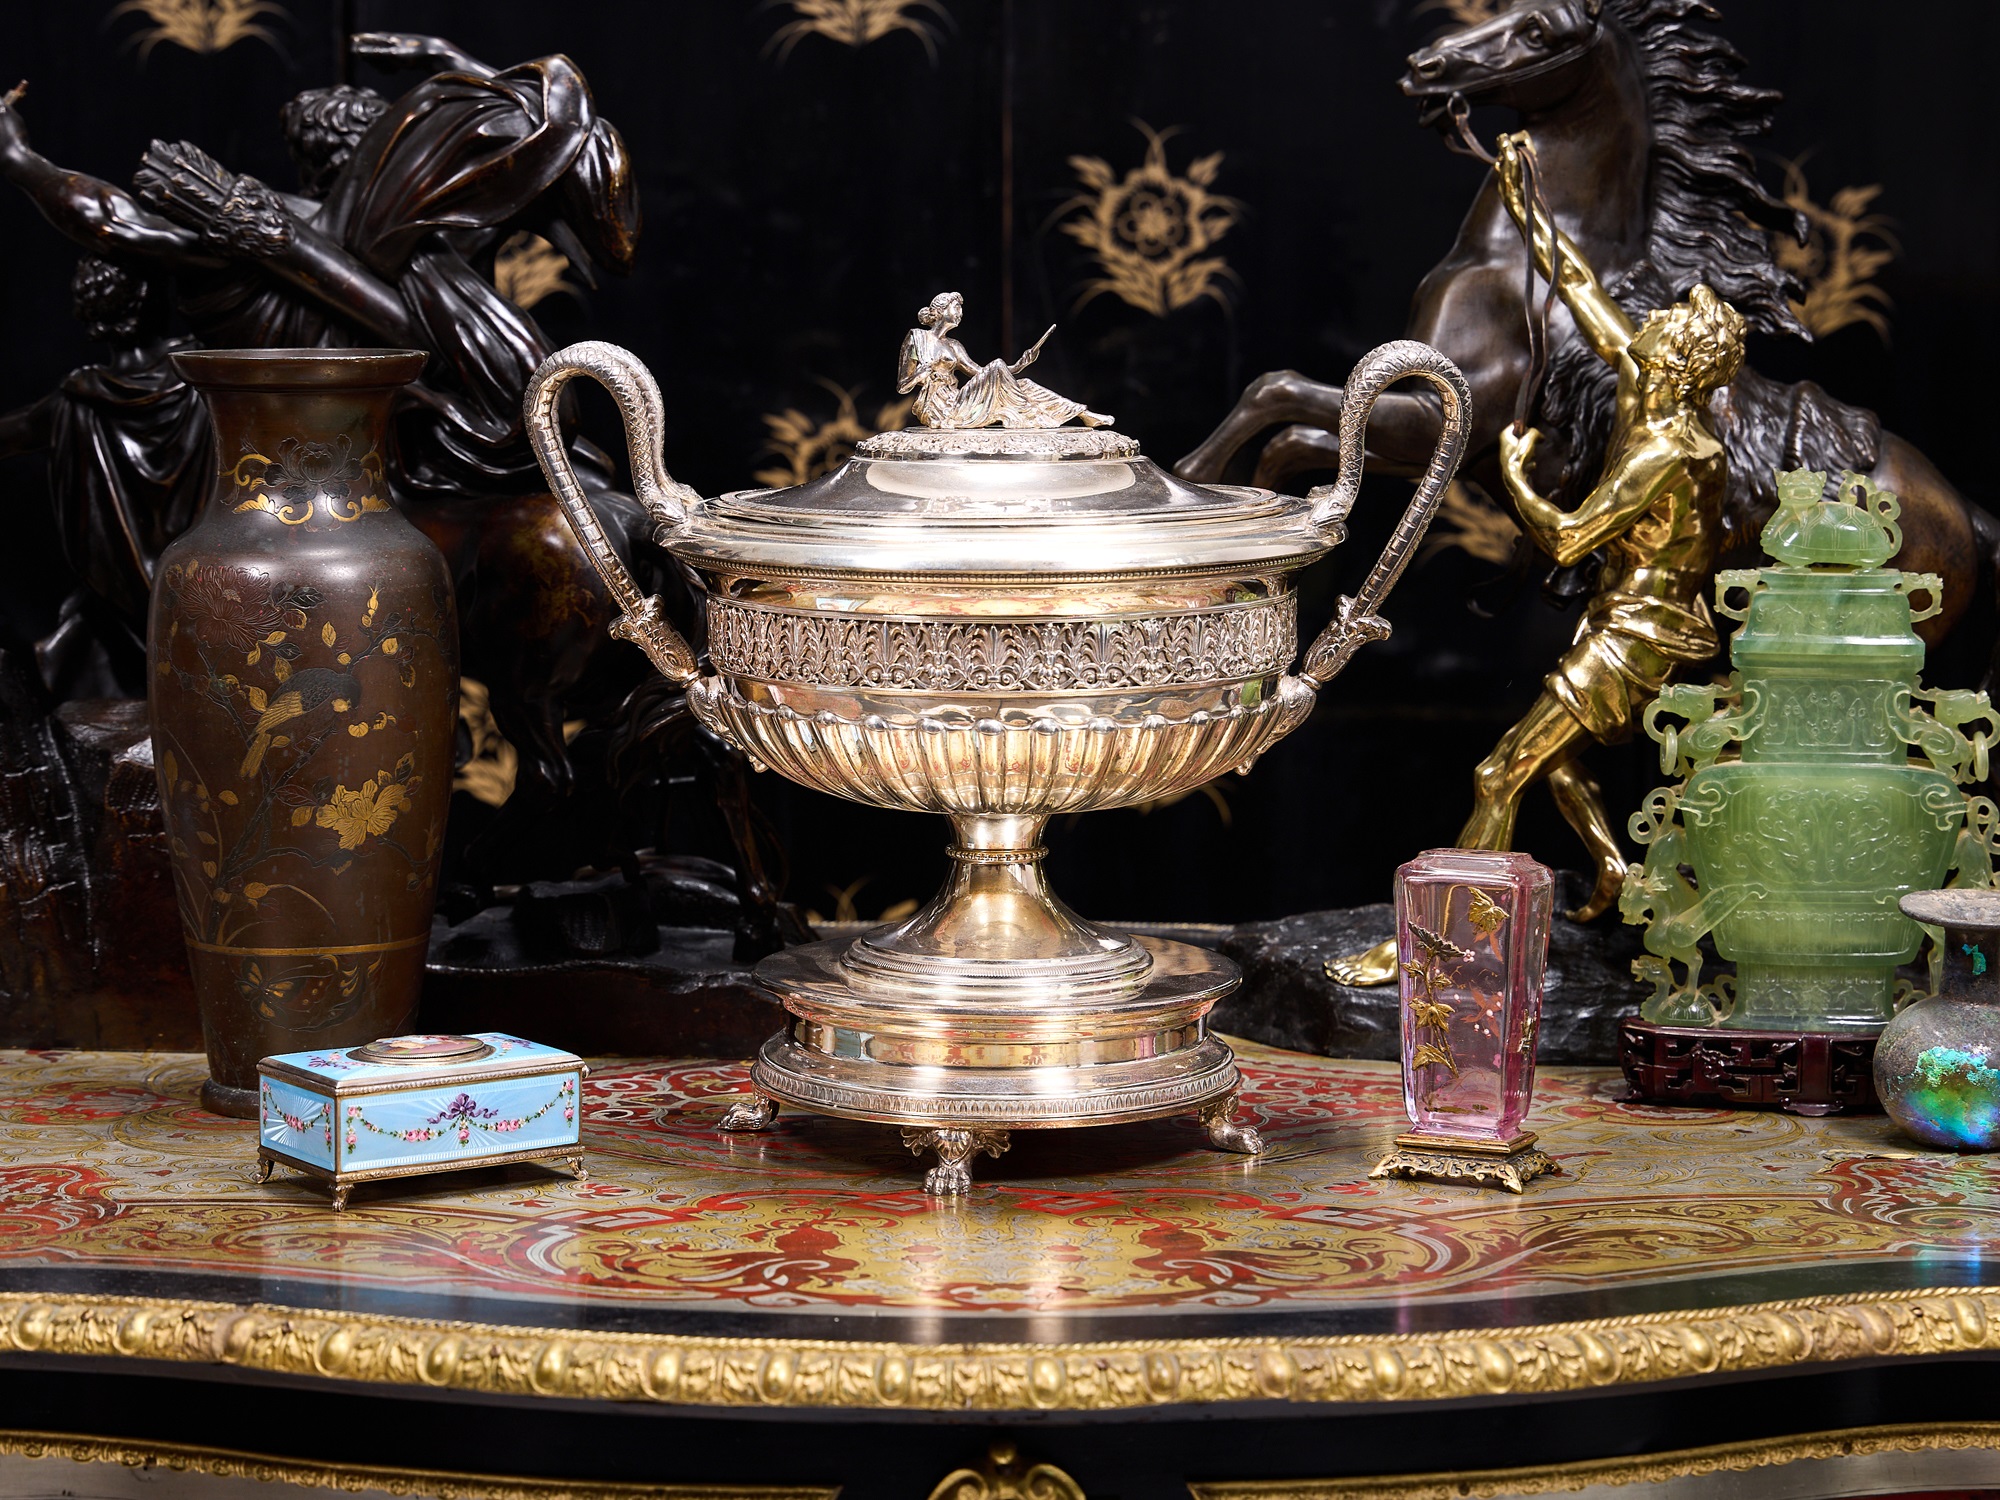 A VERY LARGE SILVER NEO-CLASSICAL STYLE URN AND COVER, ITALIAN, EARLY 20TH CENTURY